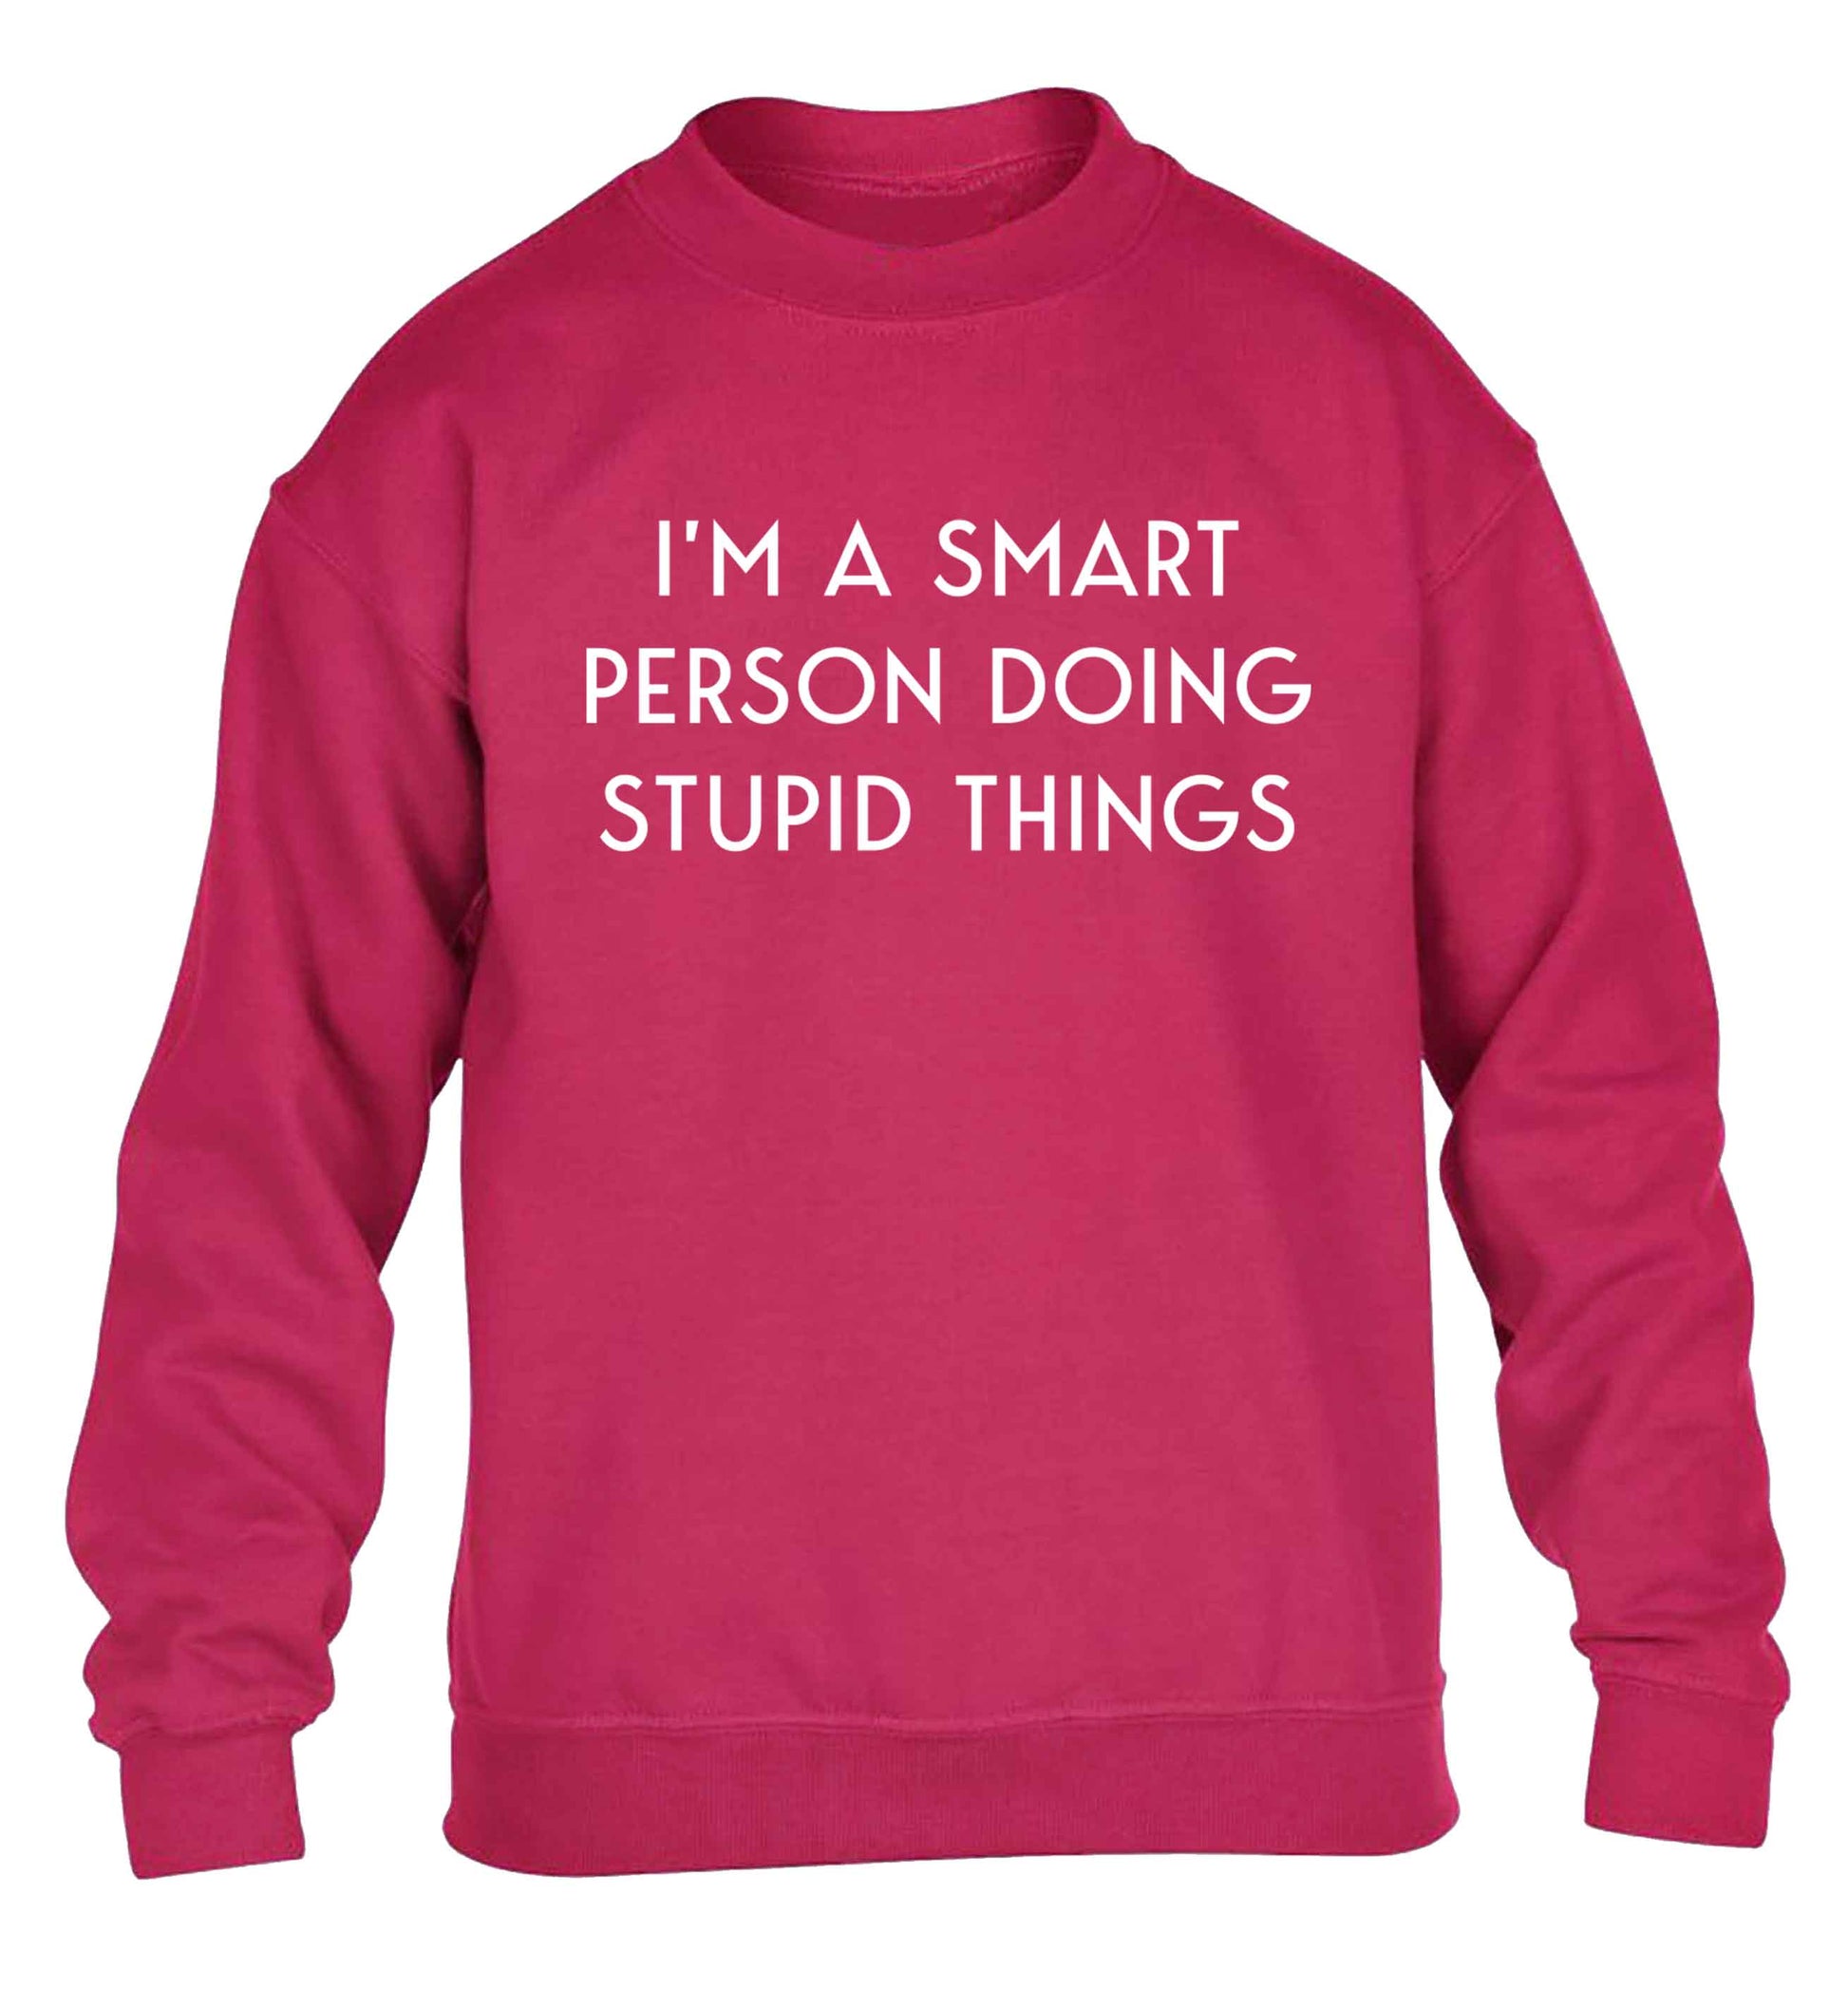 I'm a smart person doing stupid things children's pink sweater 12-13 Years